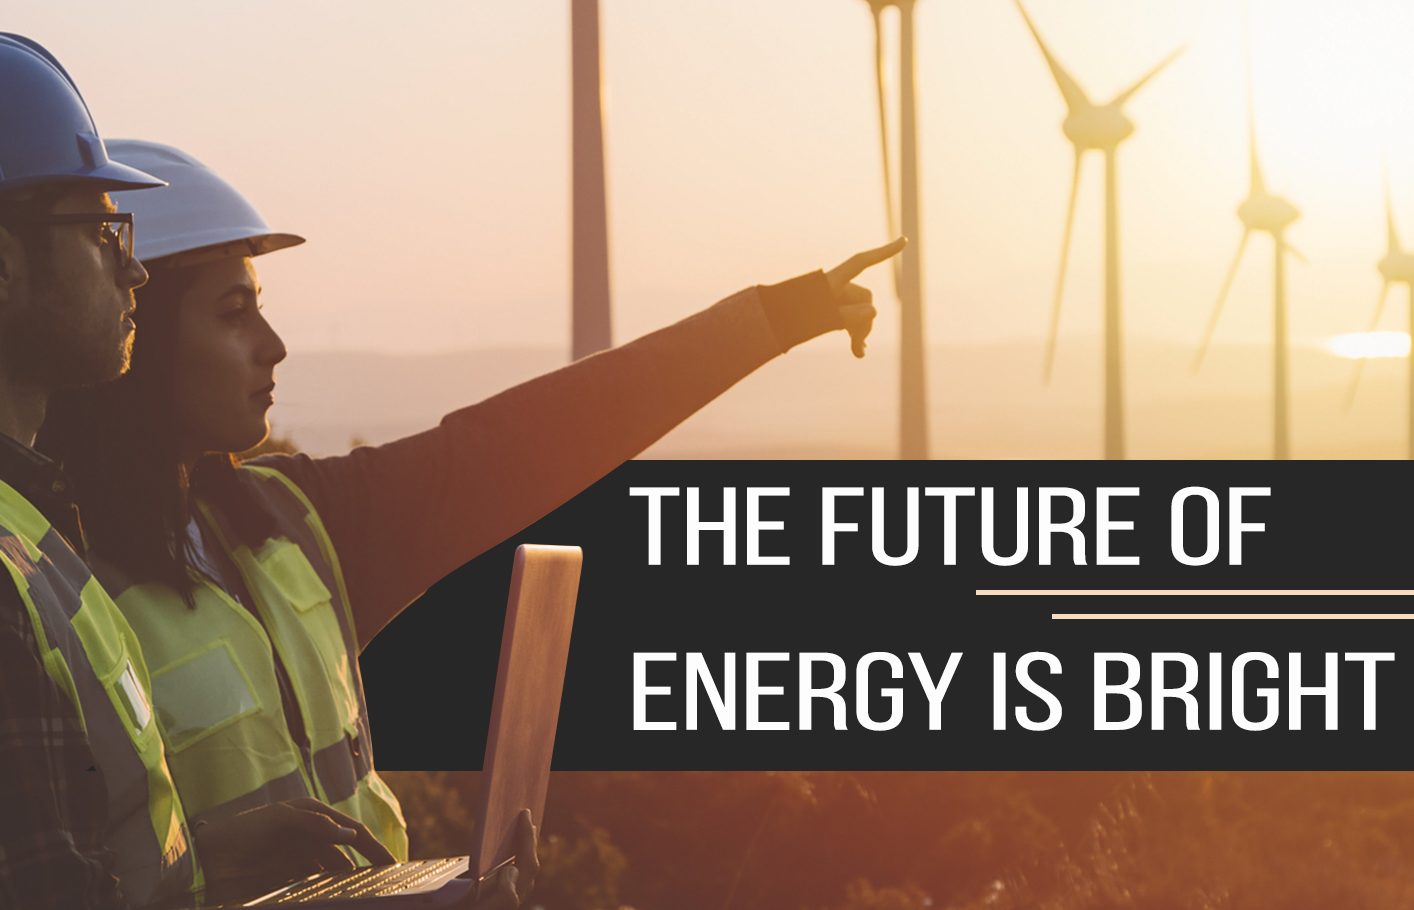 The Future of Energy Is Bright